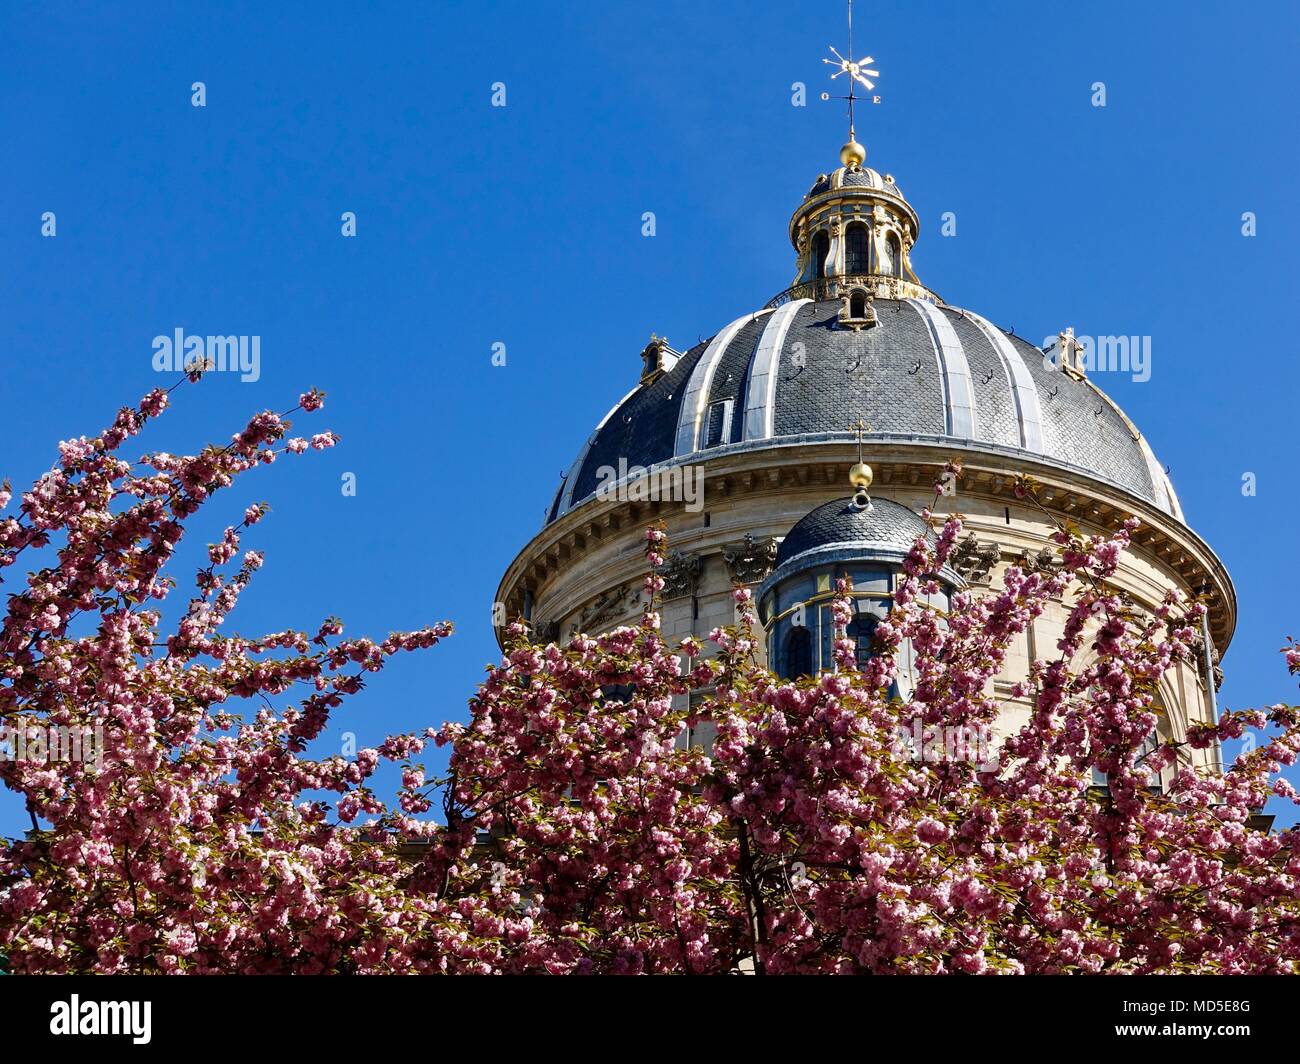 Dome of the French Institute framed by bright pink spring blossoms. Paris, France. Stock Photo